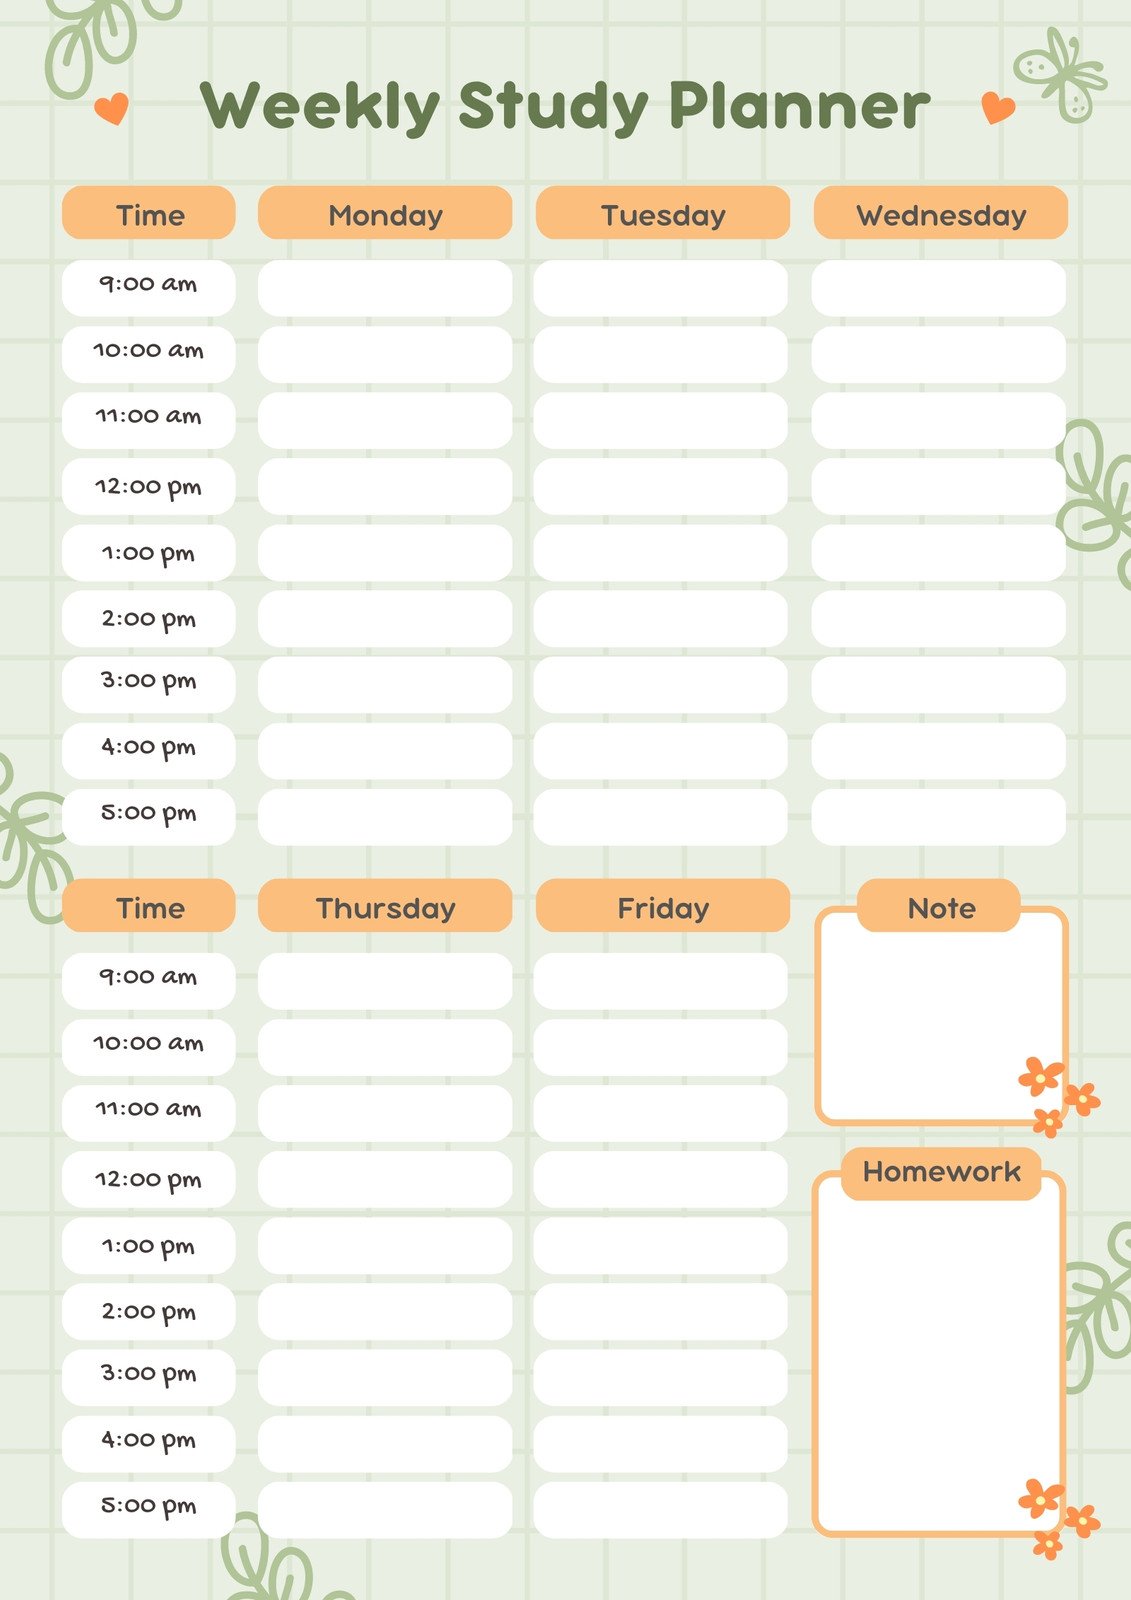 Green Cute Playful Doodle Weekly Study Planner